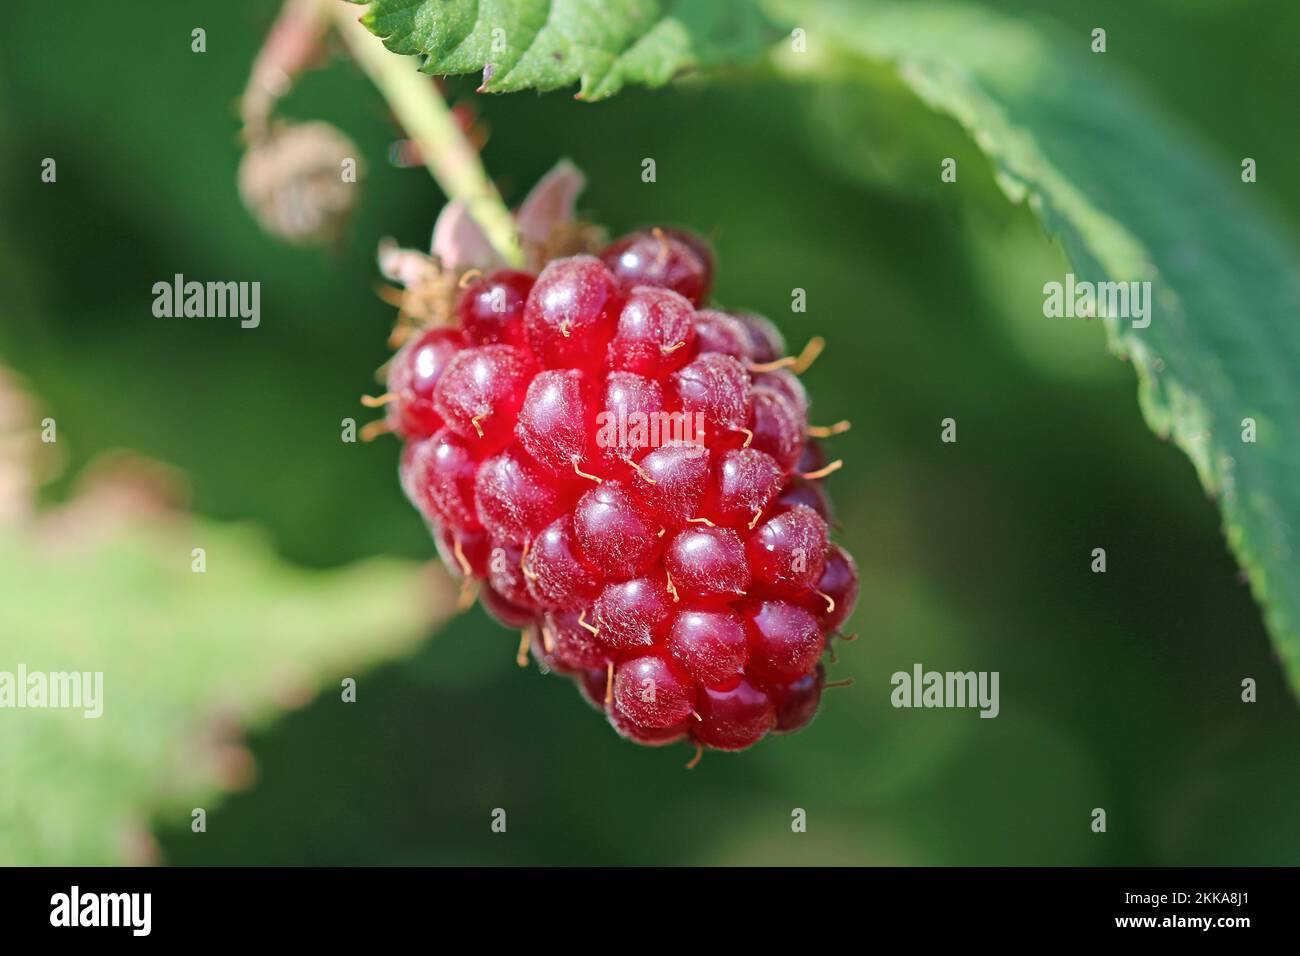 Cultivated ripe red tummelberry, Rubus hybrid, fruit in close up, on the bush with a background of blurred leaves. Stock Photo